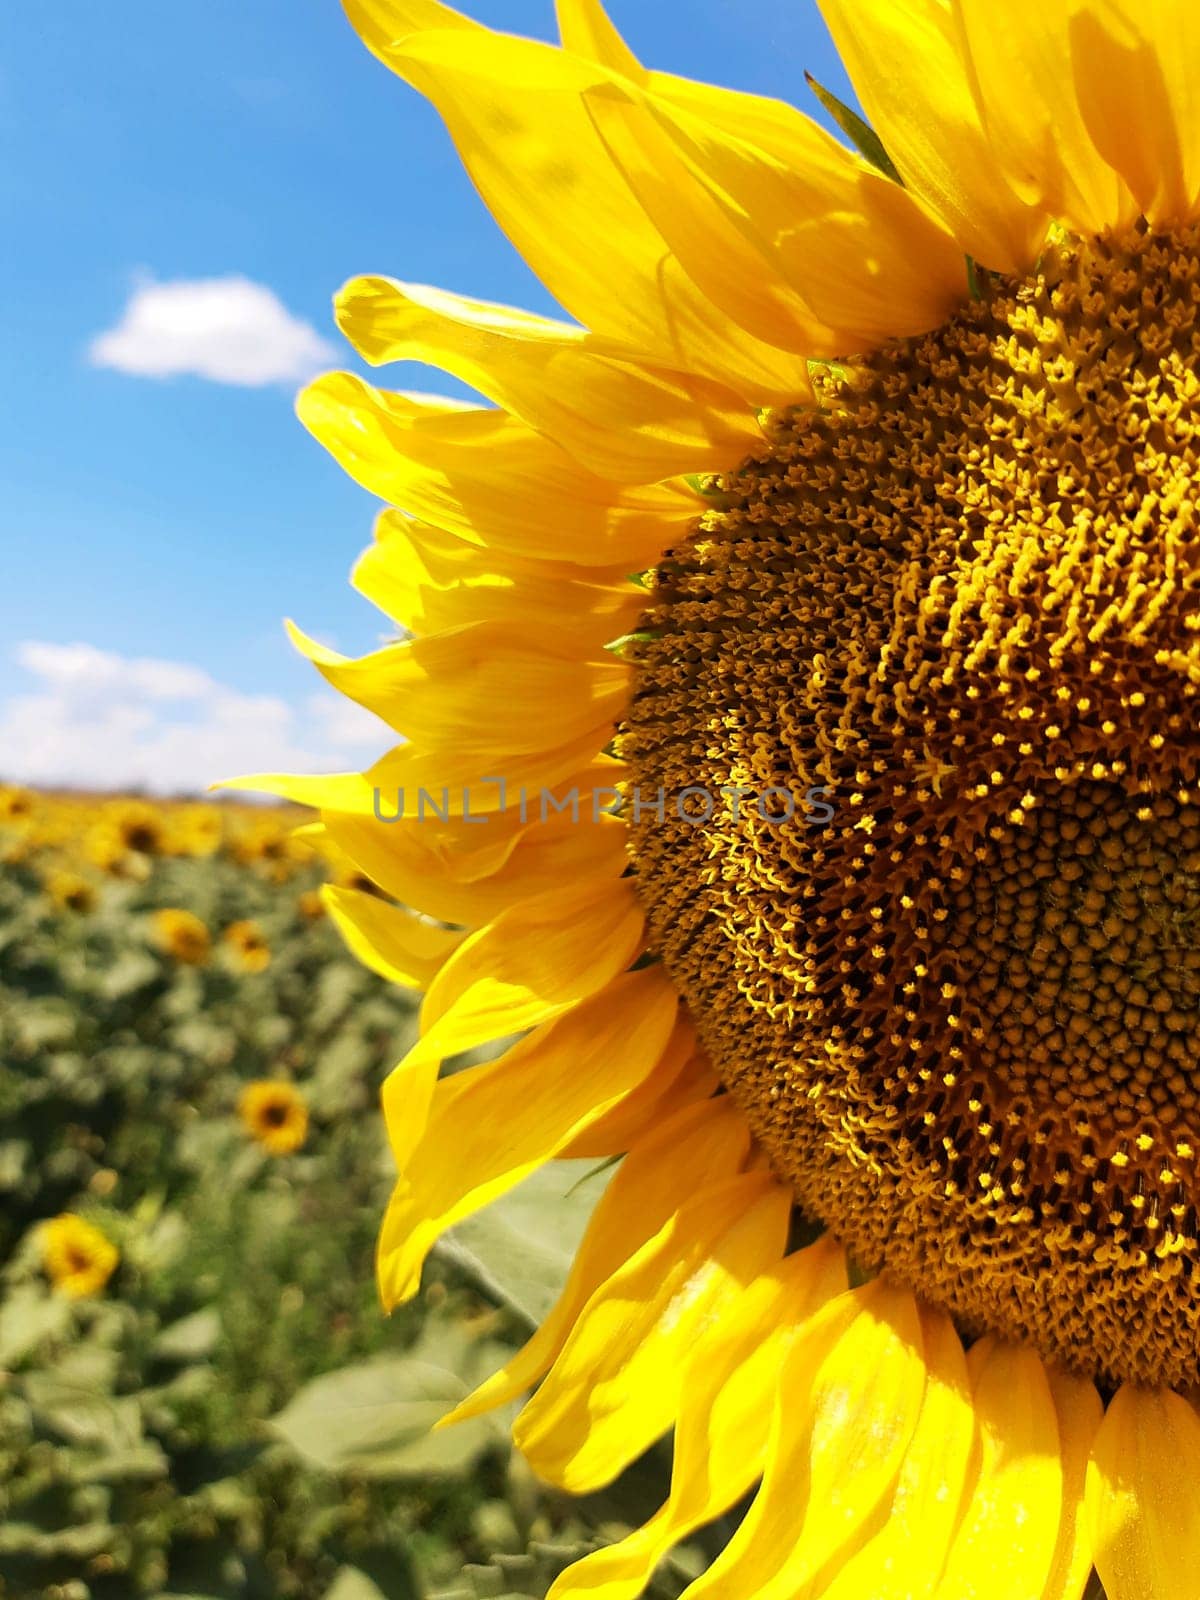 Part of the head of a sunflower against the background of a field of sunflowers and blue sky close-up.